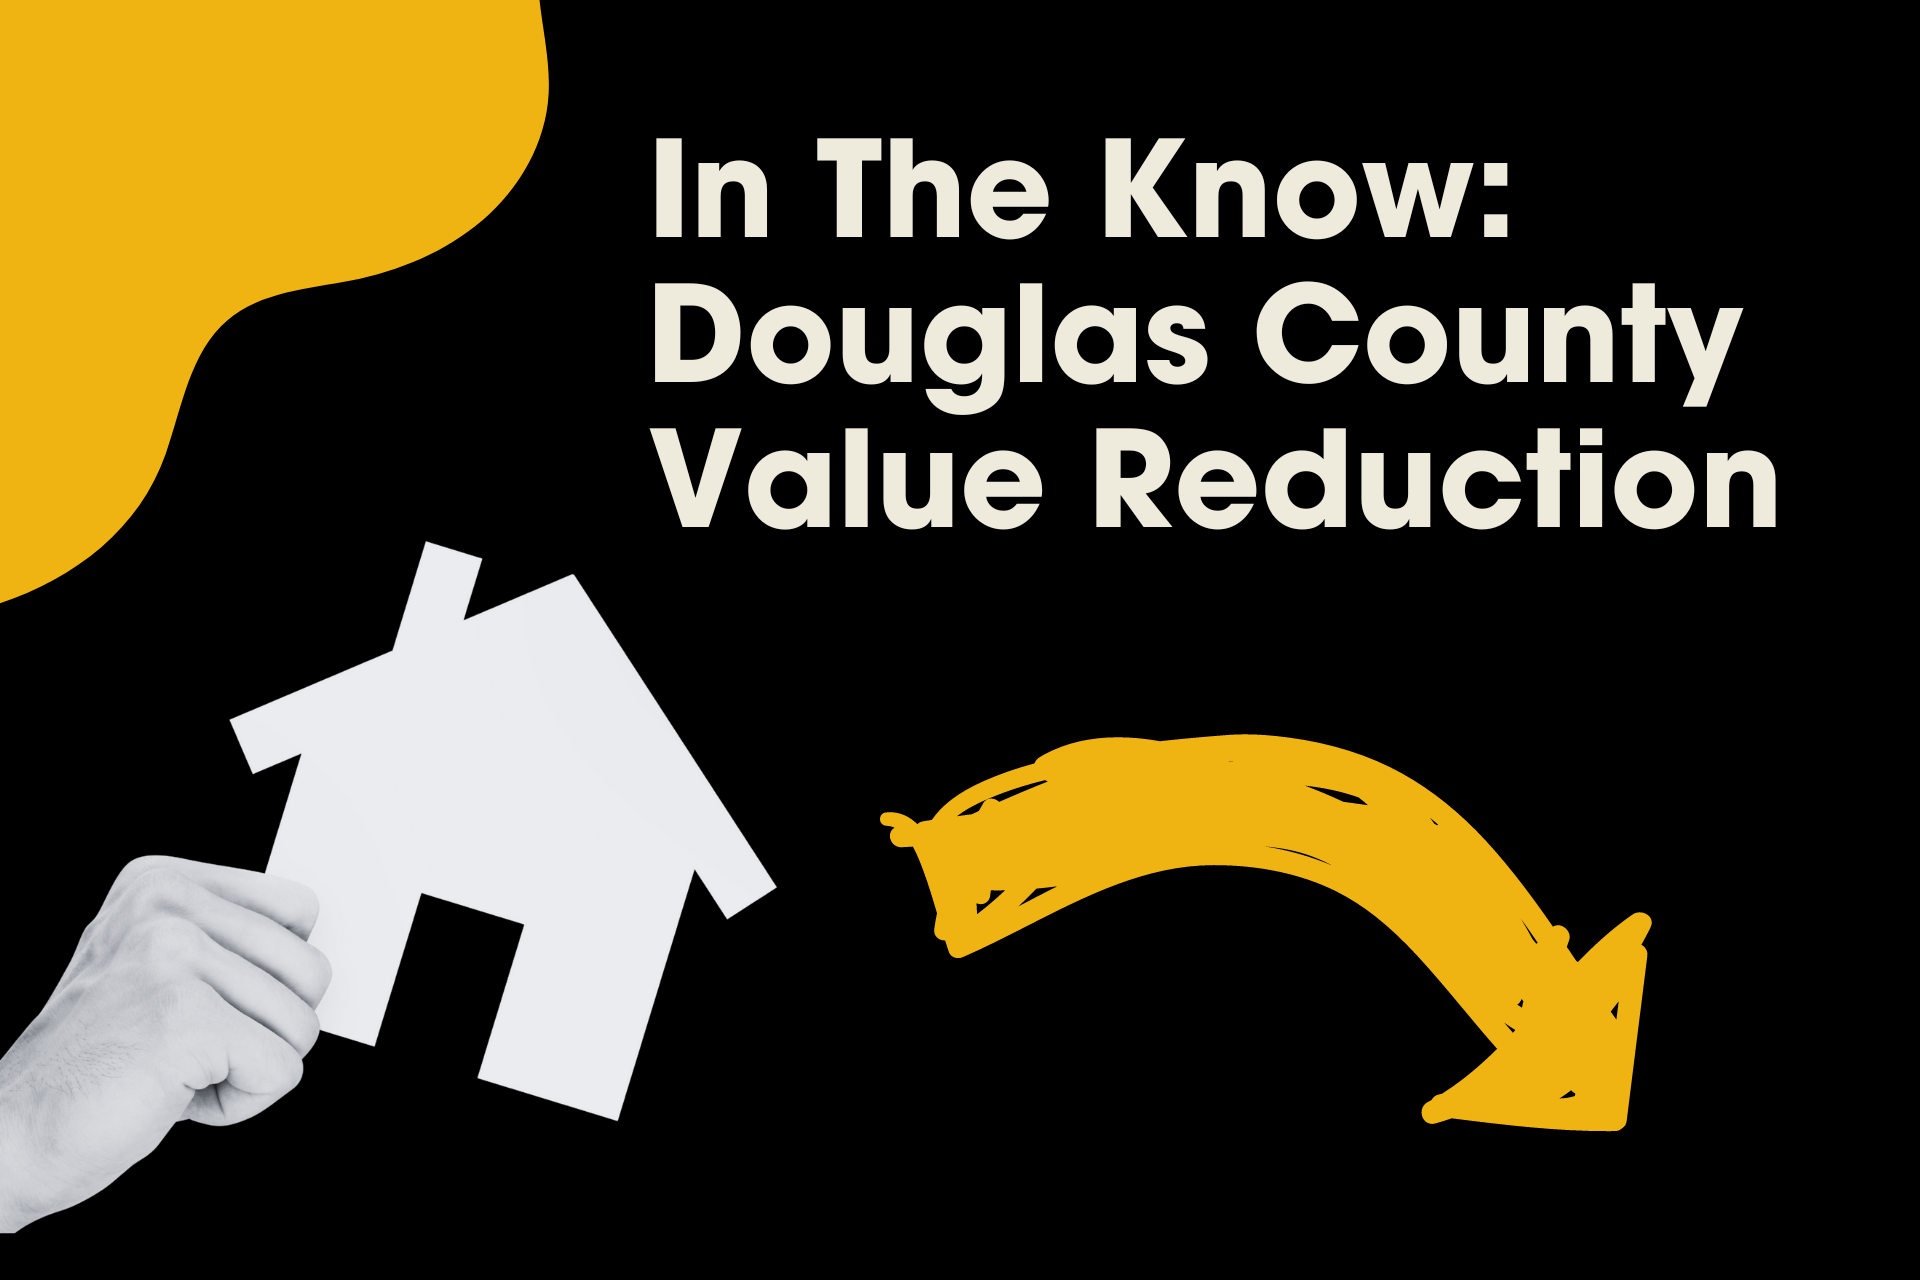 Black and yellow graphic with text "in the know: Douglas County property values reduction" featuring a hand holding a paper house cutout.